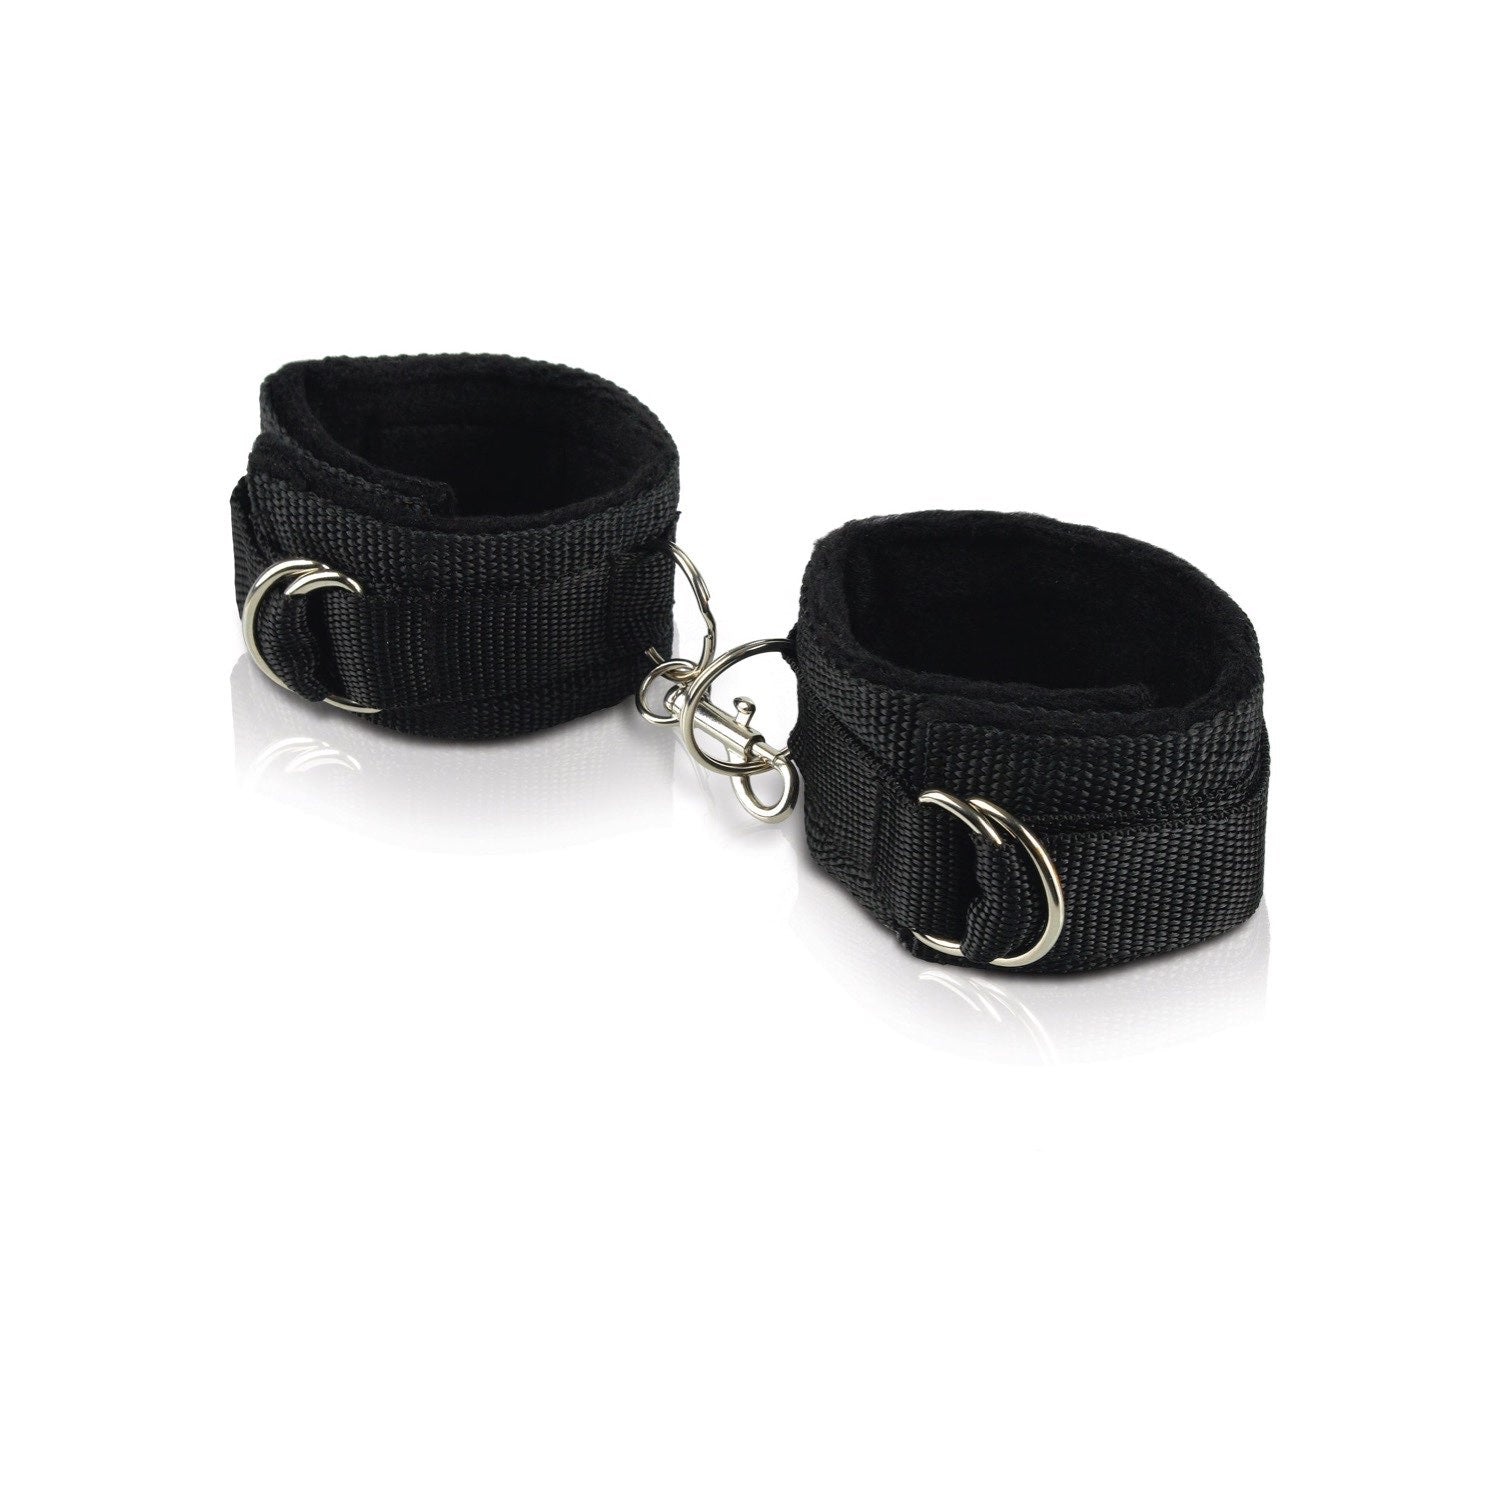 Fetish Fantasy Series Limited Edition Luv Cuffs - Black Restraints by Pipedream